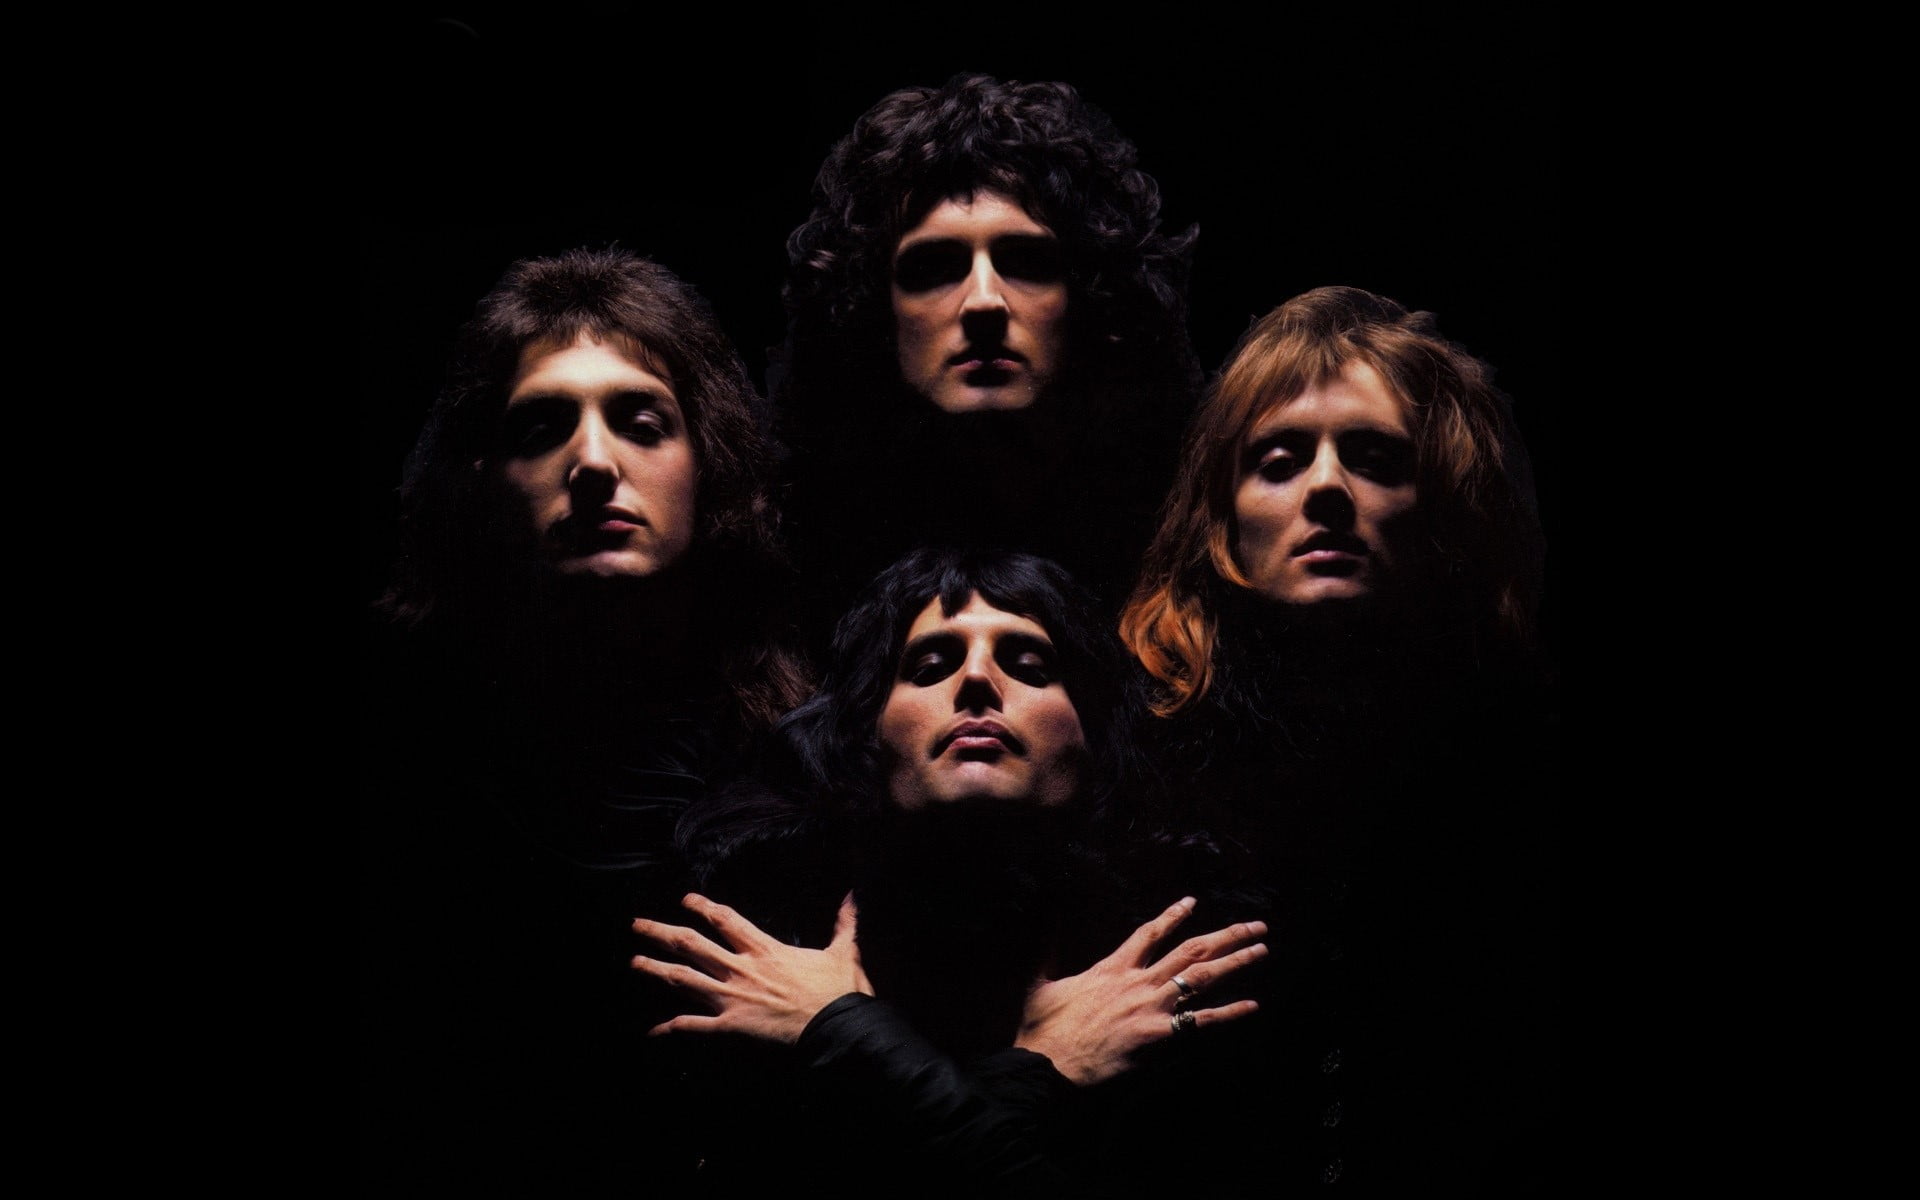 Queen, Band, Members, Youth, Hair, group of people, black background